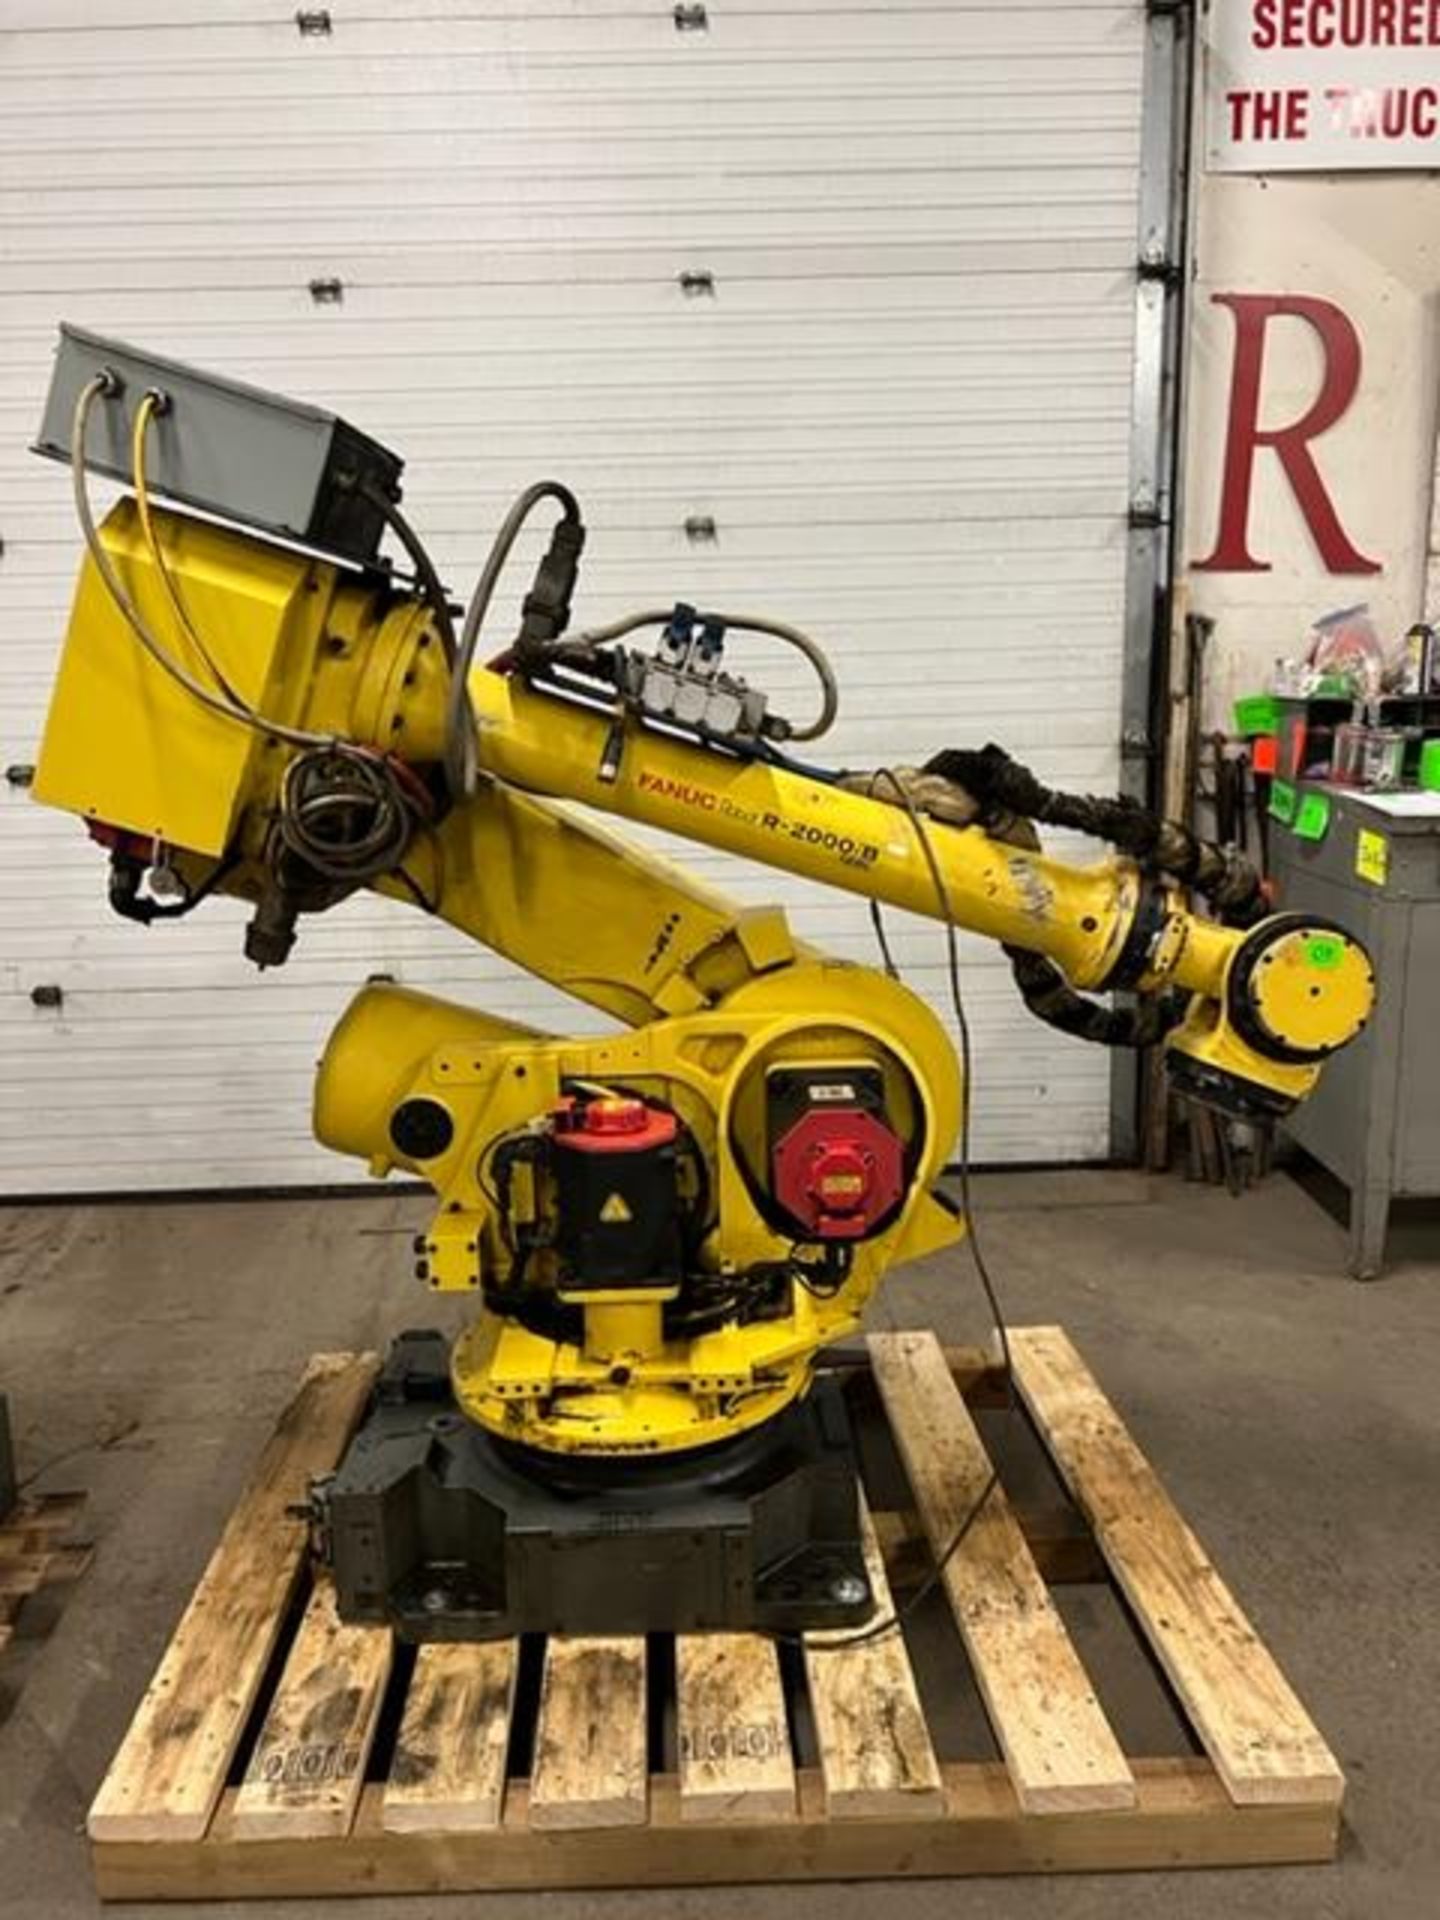 MINT 2008 Fanuc Handling Robot Model R-2000iB 125L - 125kg payload with R-30iA Controller and - Image 2 of 3